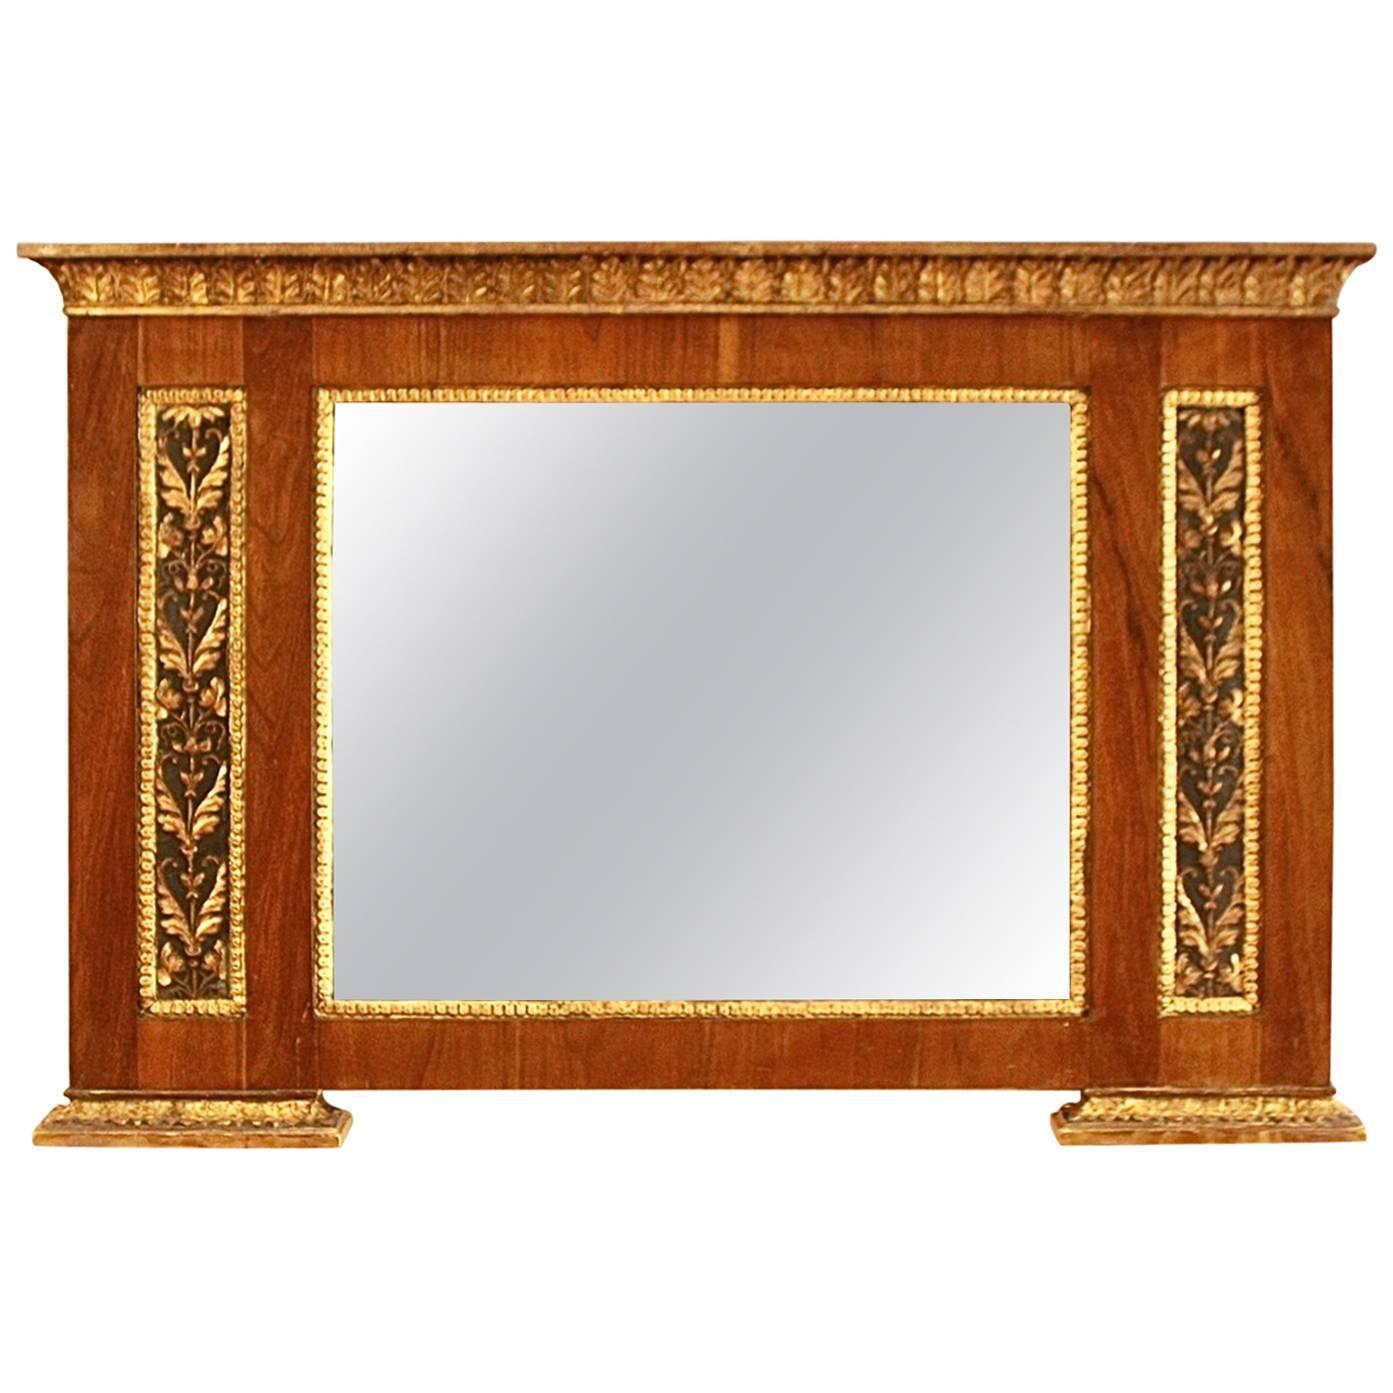 Early 19th Century North Italy Neoclassical Walnut Giltwood Overmantel Mirror 